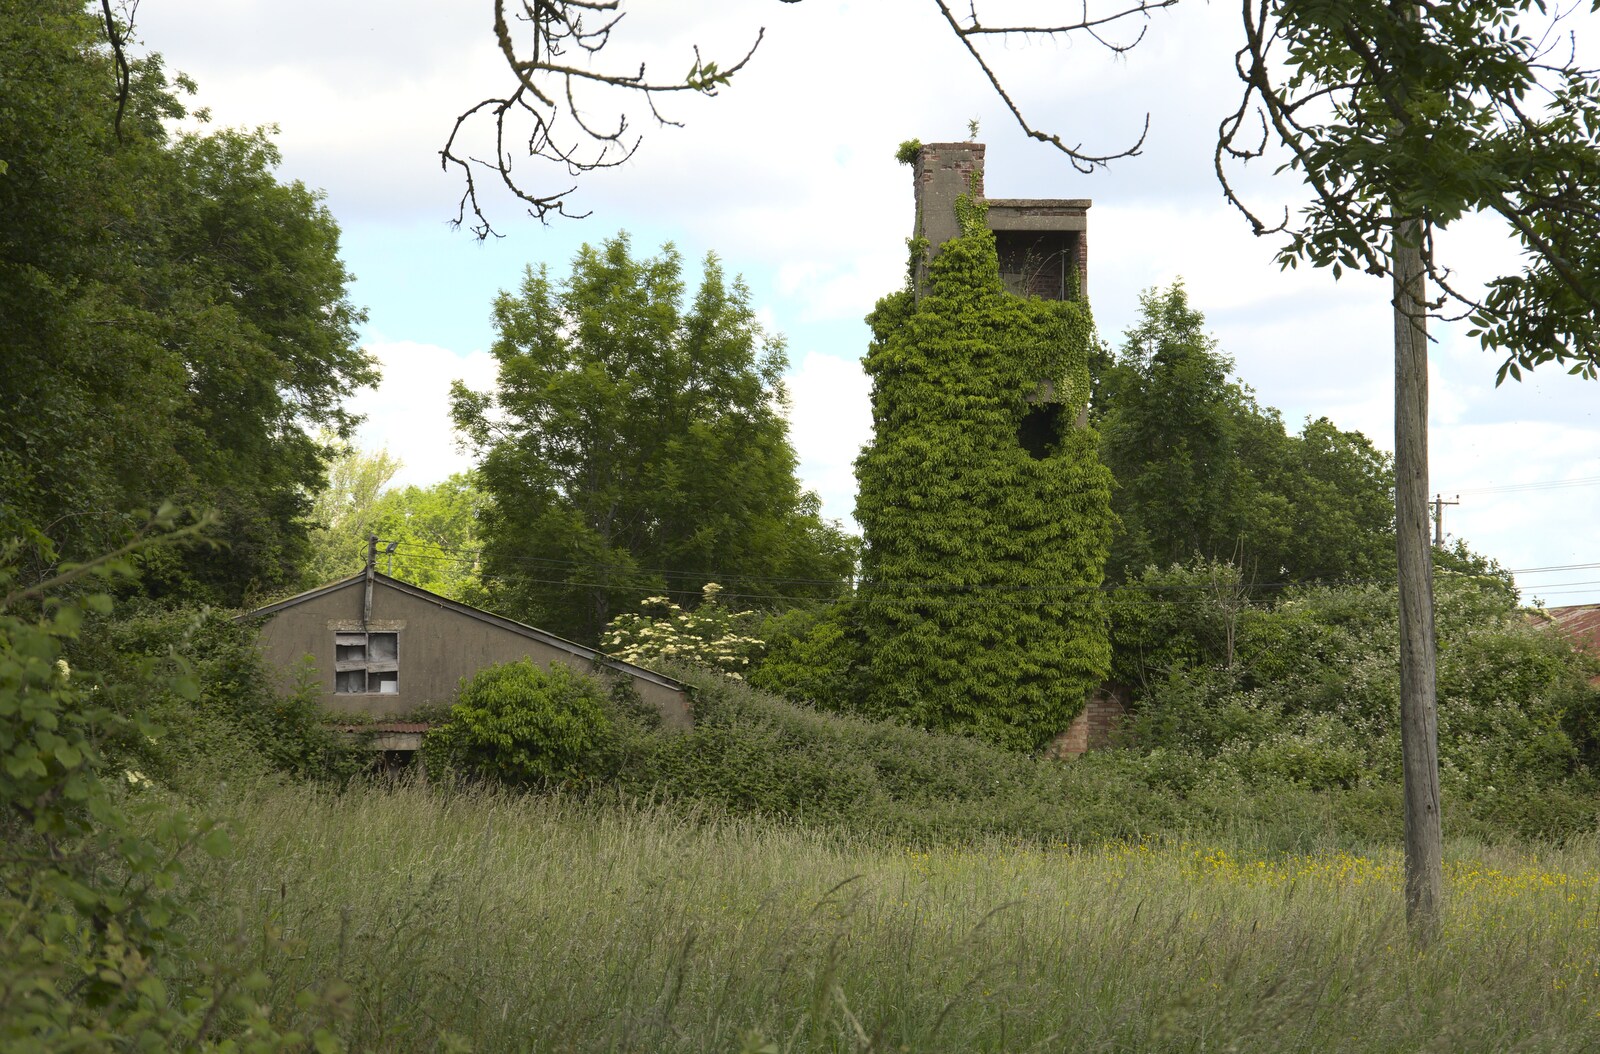 Ivy covers a tower from A 1940s Timewarp, Site 4, Bungay Airfield, Flixton, Suffolk - 9th June 2022